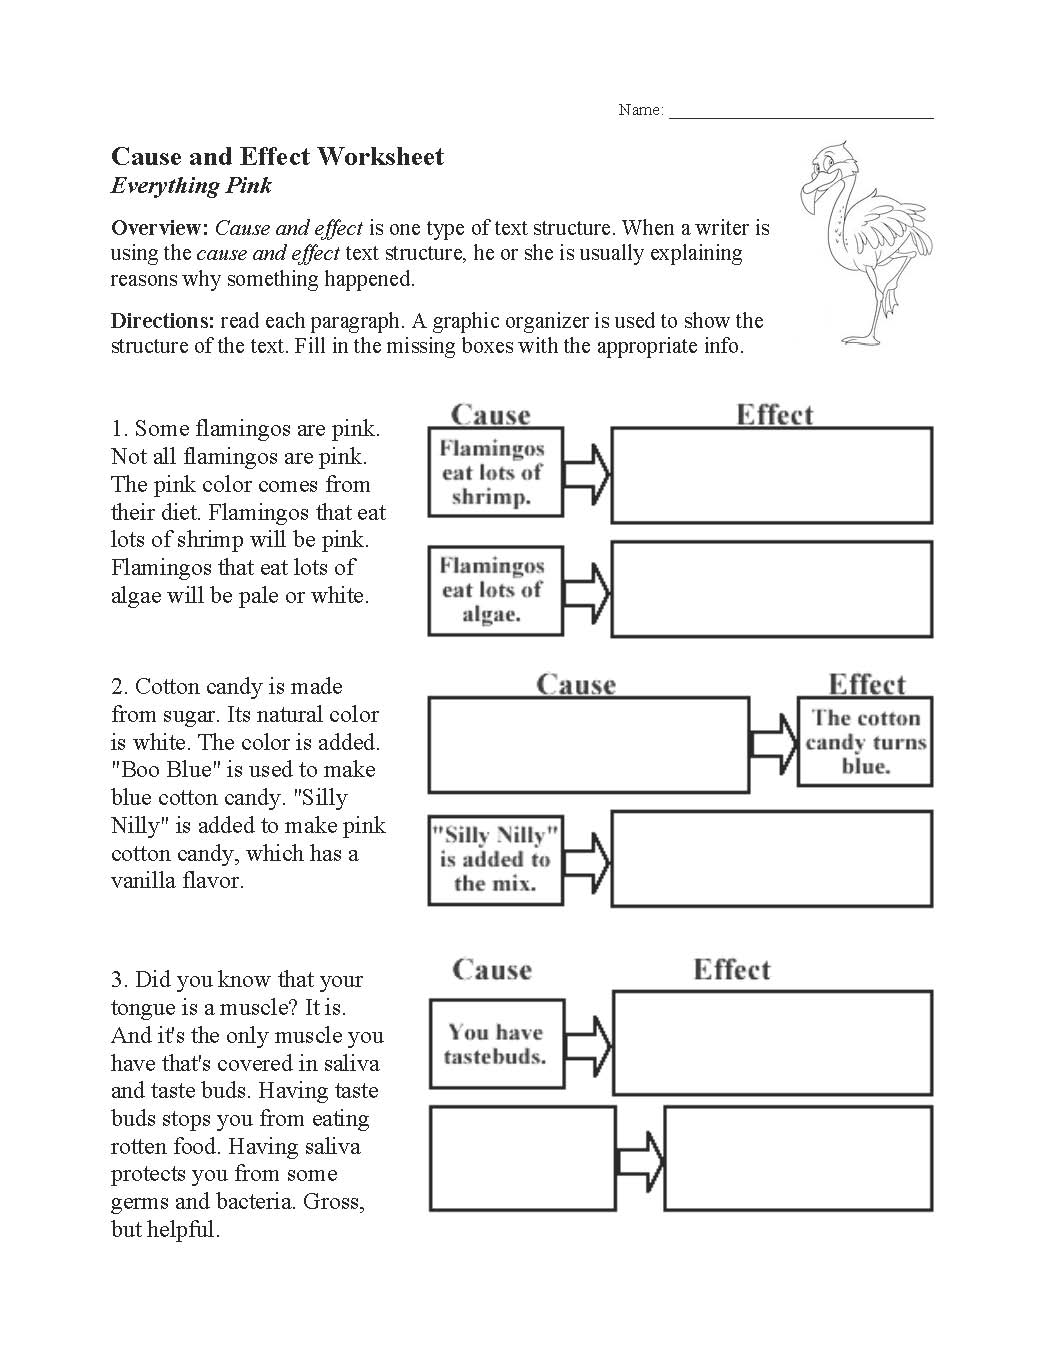 This is a preview image of one of our Text Structure Worksheets. Click on it to view all of our text structure worksheets.